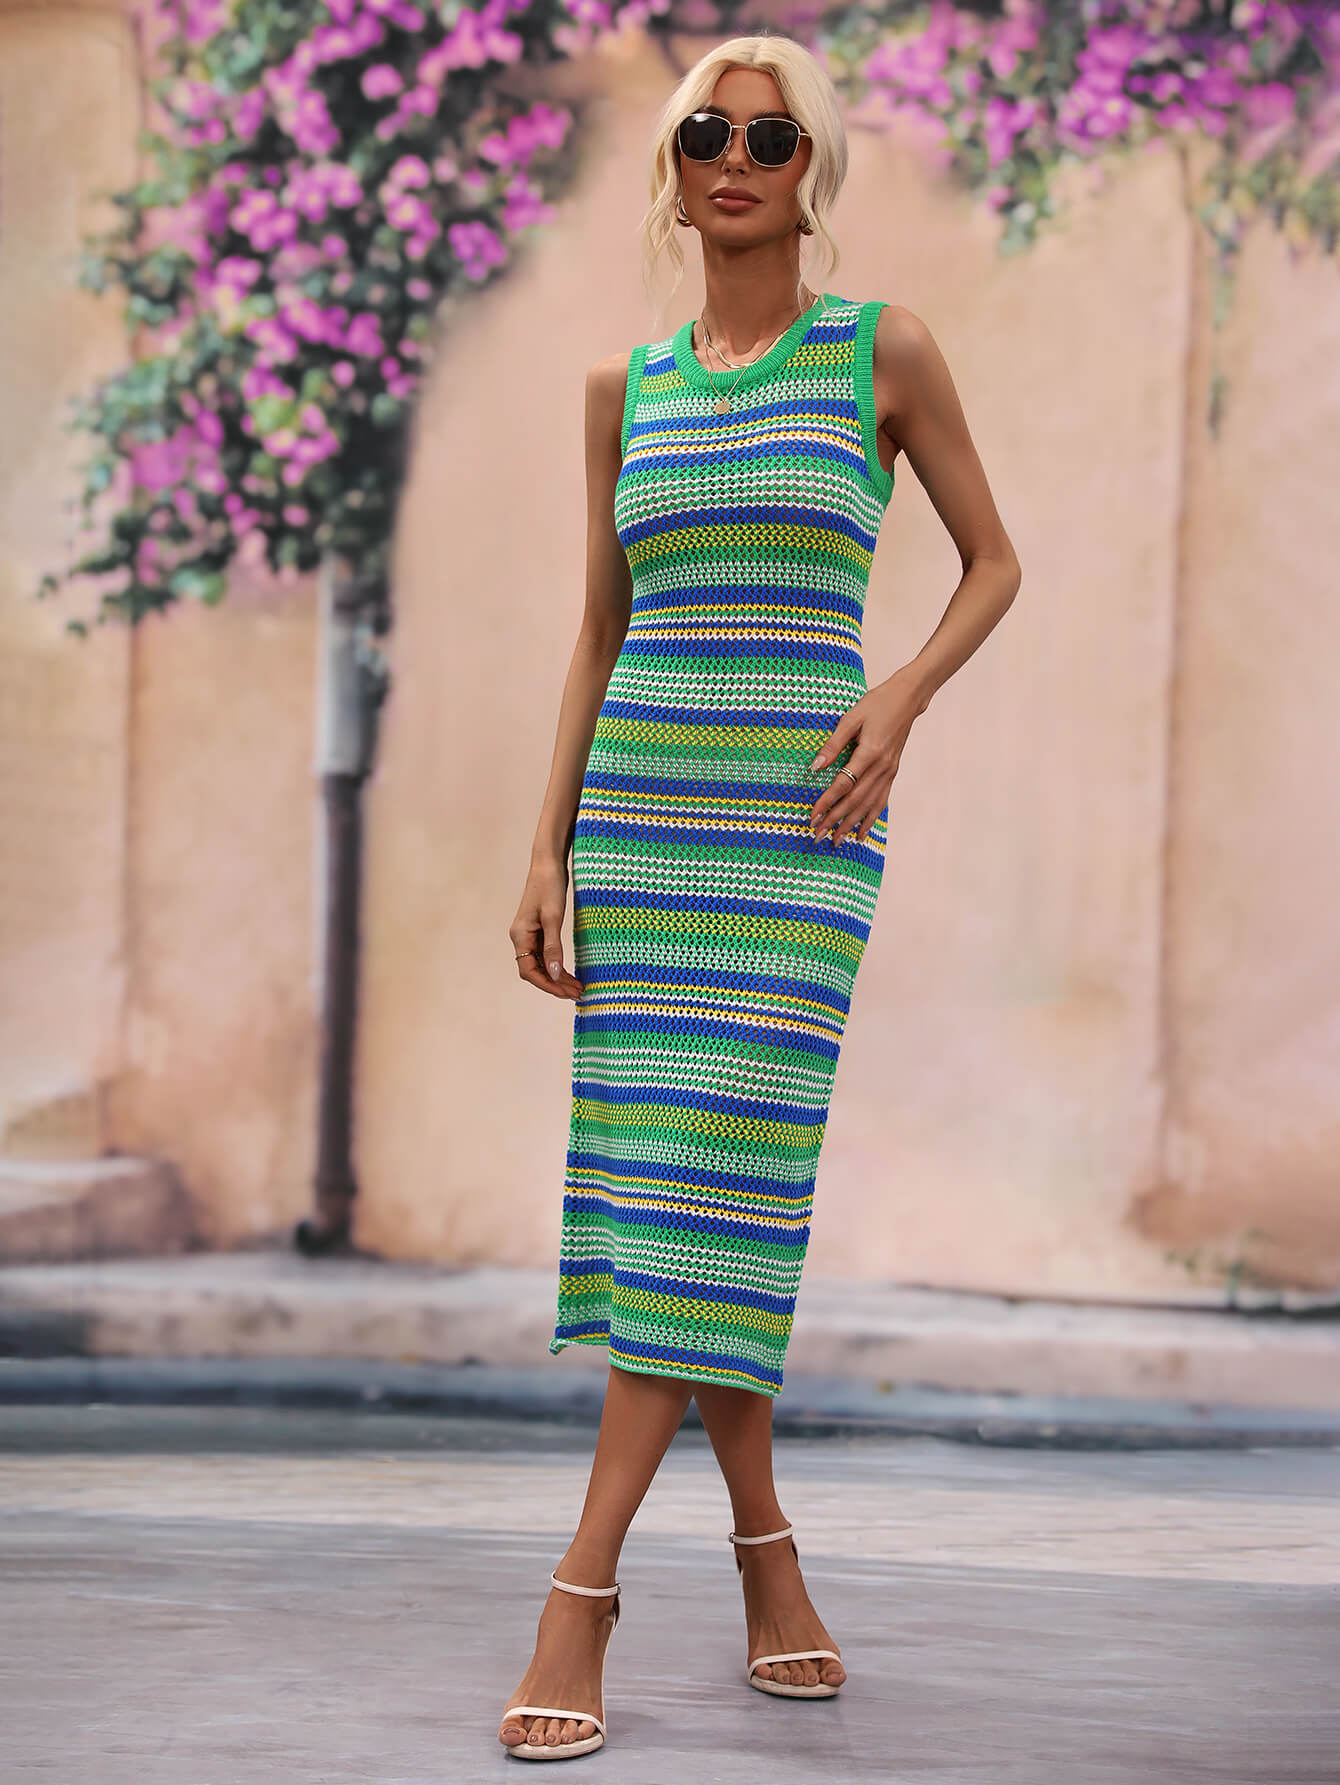 Striped Round Neck Sleeveless Midi Cover Up Dress - The Downtown Dachshund